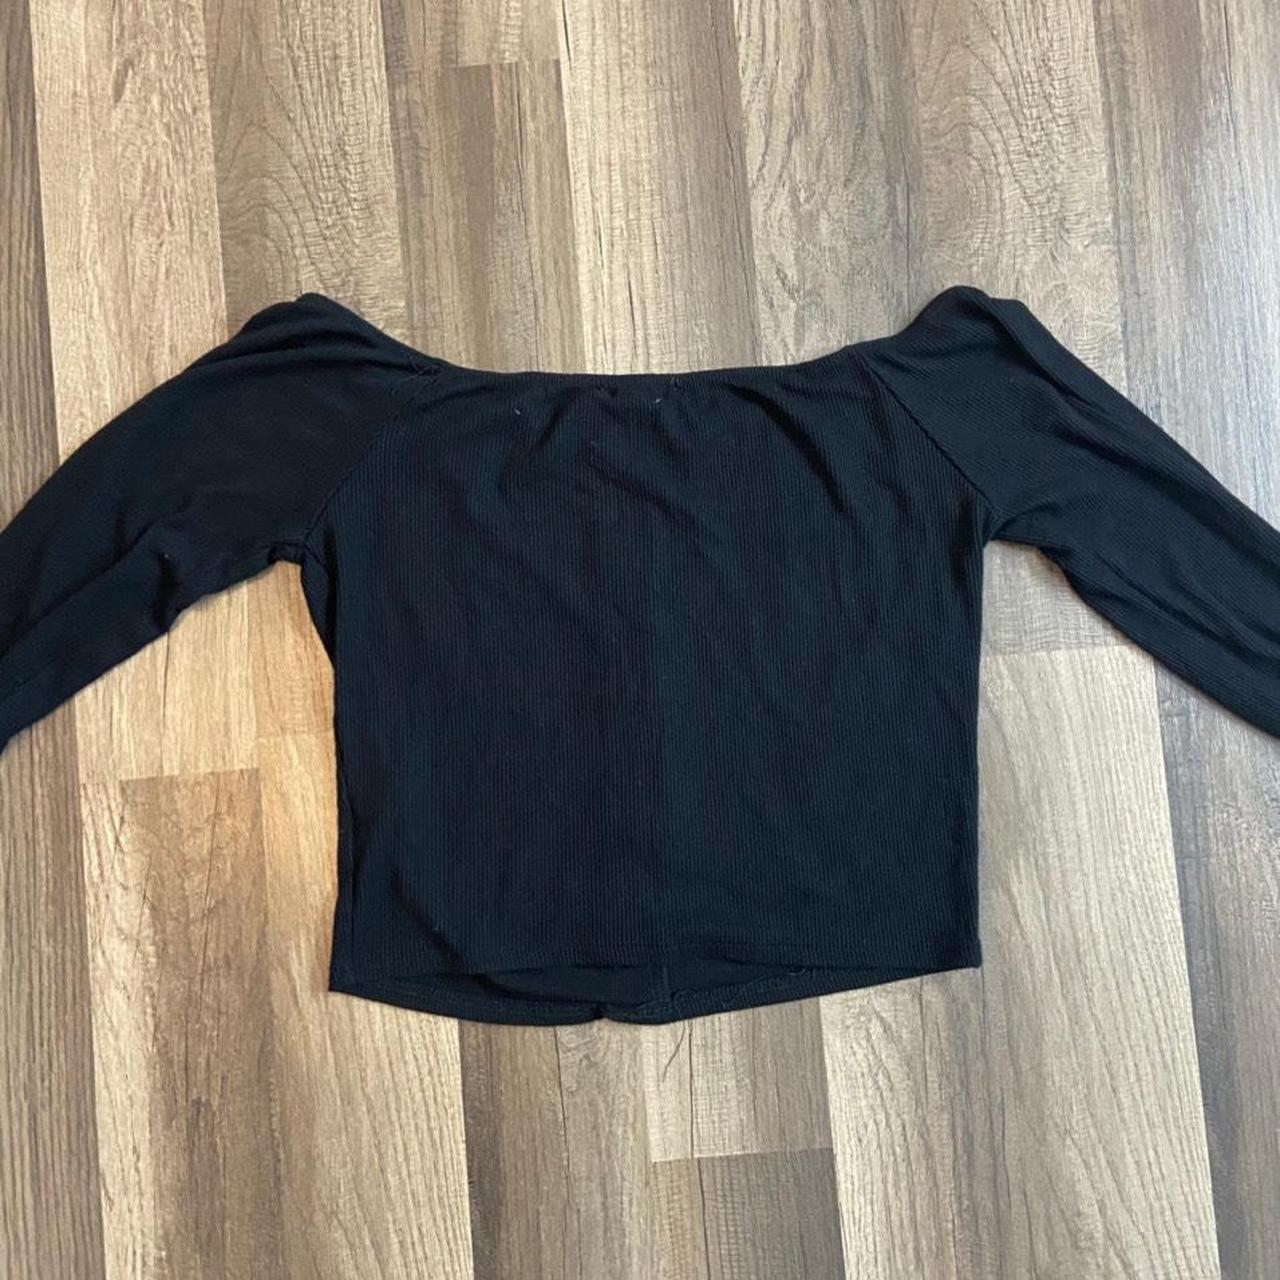 Product Image 4 - black croptop with buttons ꨄ!

MESSAGE